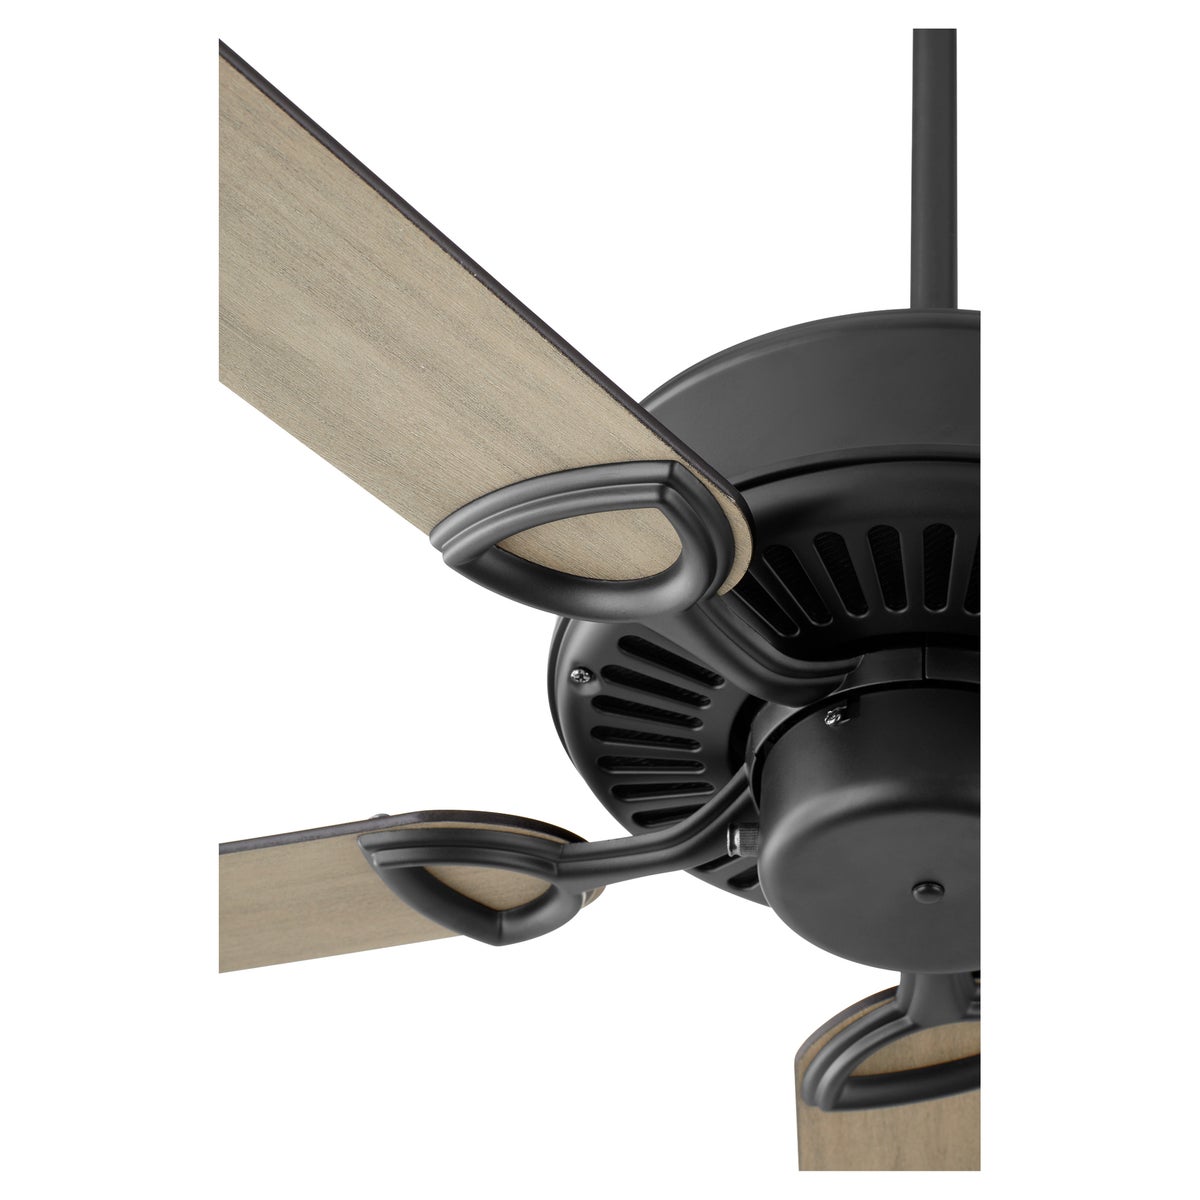 Traditional Ceiling Fan with wood blades, complementing wooden items. Classic design, rounded-edged blades held by a simple stylistic structure. Brand: Quorum International. Motor Size: 153x15. Watts: 66/29/9. Amps: .58/.39/.21. RPMs: 175/104/58. 5 blades, 14-degree pitch. Certifications: UL Listed. Safety Rating: Dry Location. Finish options: Antique White, Matte Black, Oiled Bronze, Old World, Satin Nickel, Studio White, Toasted Sienna, White. Dimensions: 12"H x 52"W. Warranty: Limited Lifetime.